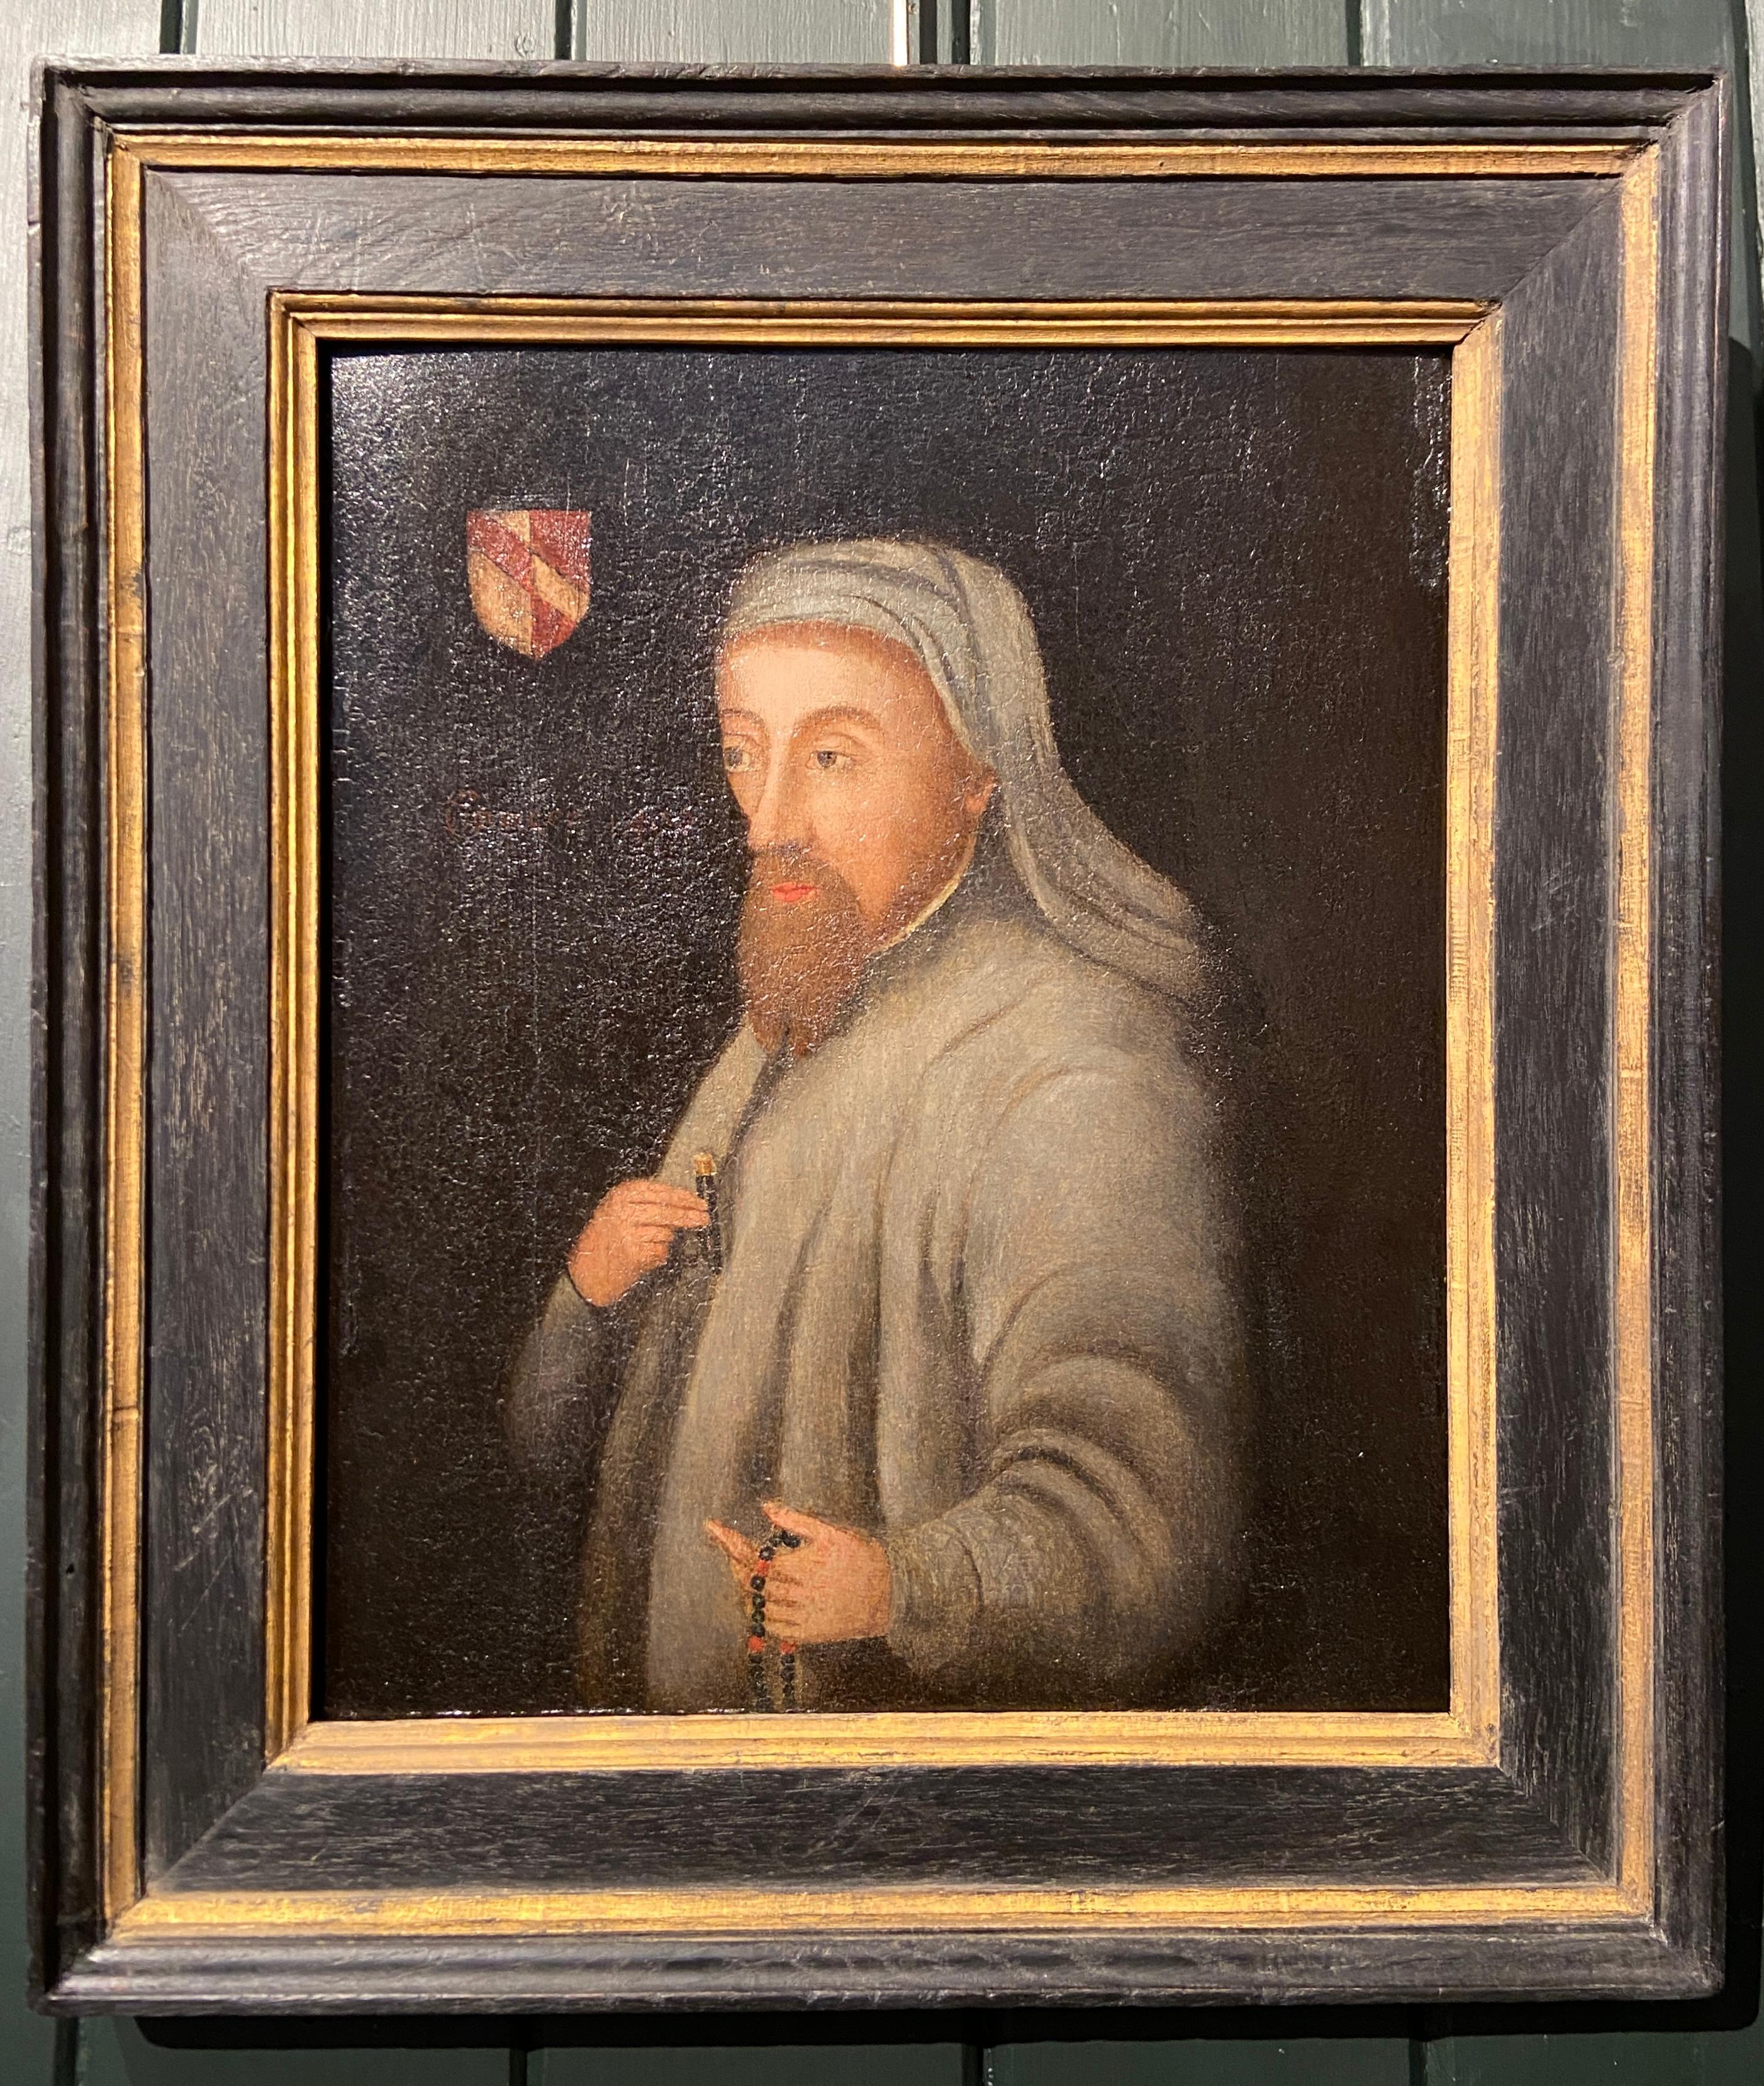 Portrait of Geoffrey Chaucer, Oil on Oak Panel Portrait, 16th Century - Painting by Mid 16th Century English School